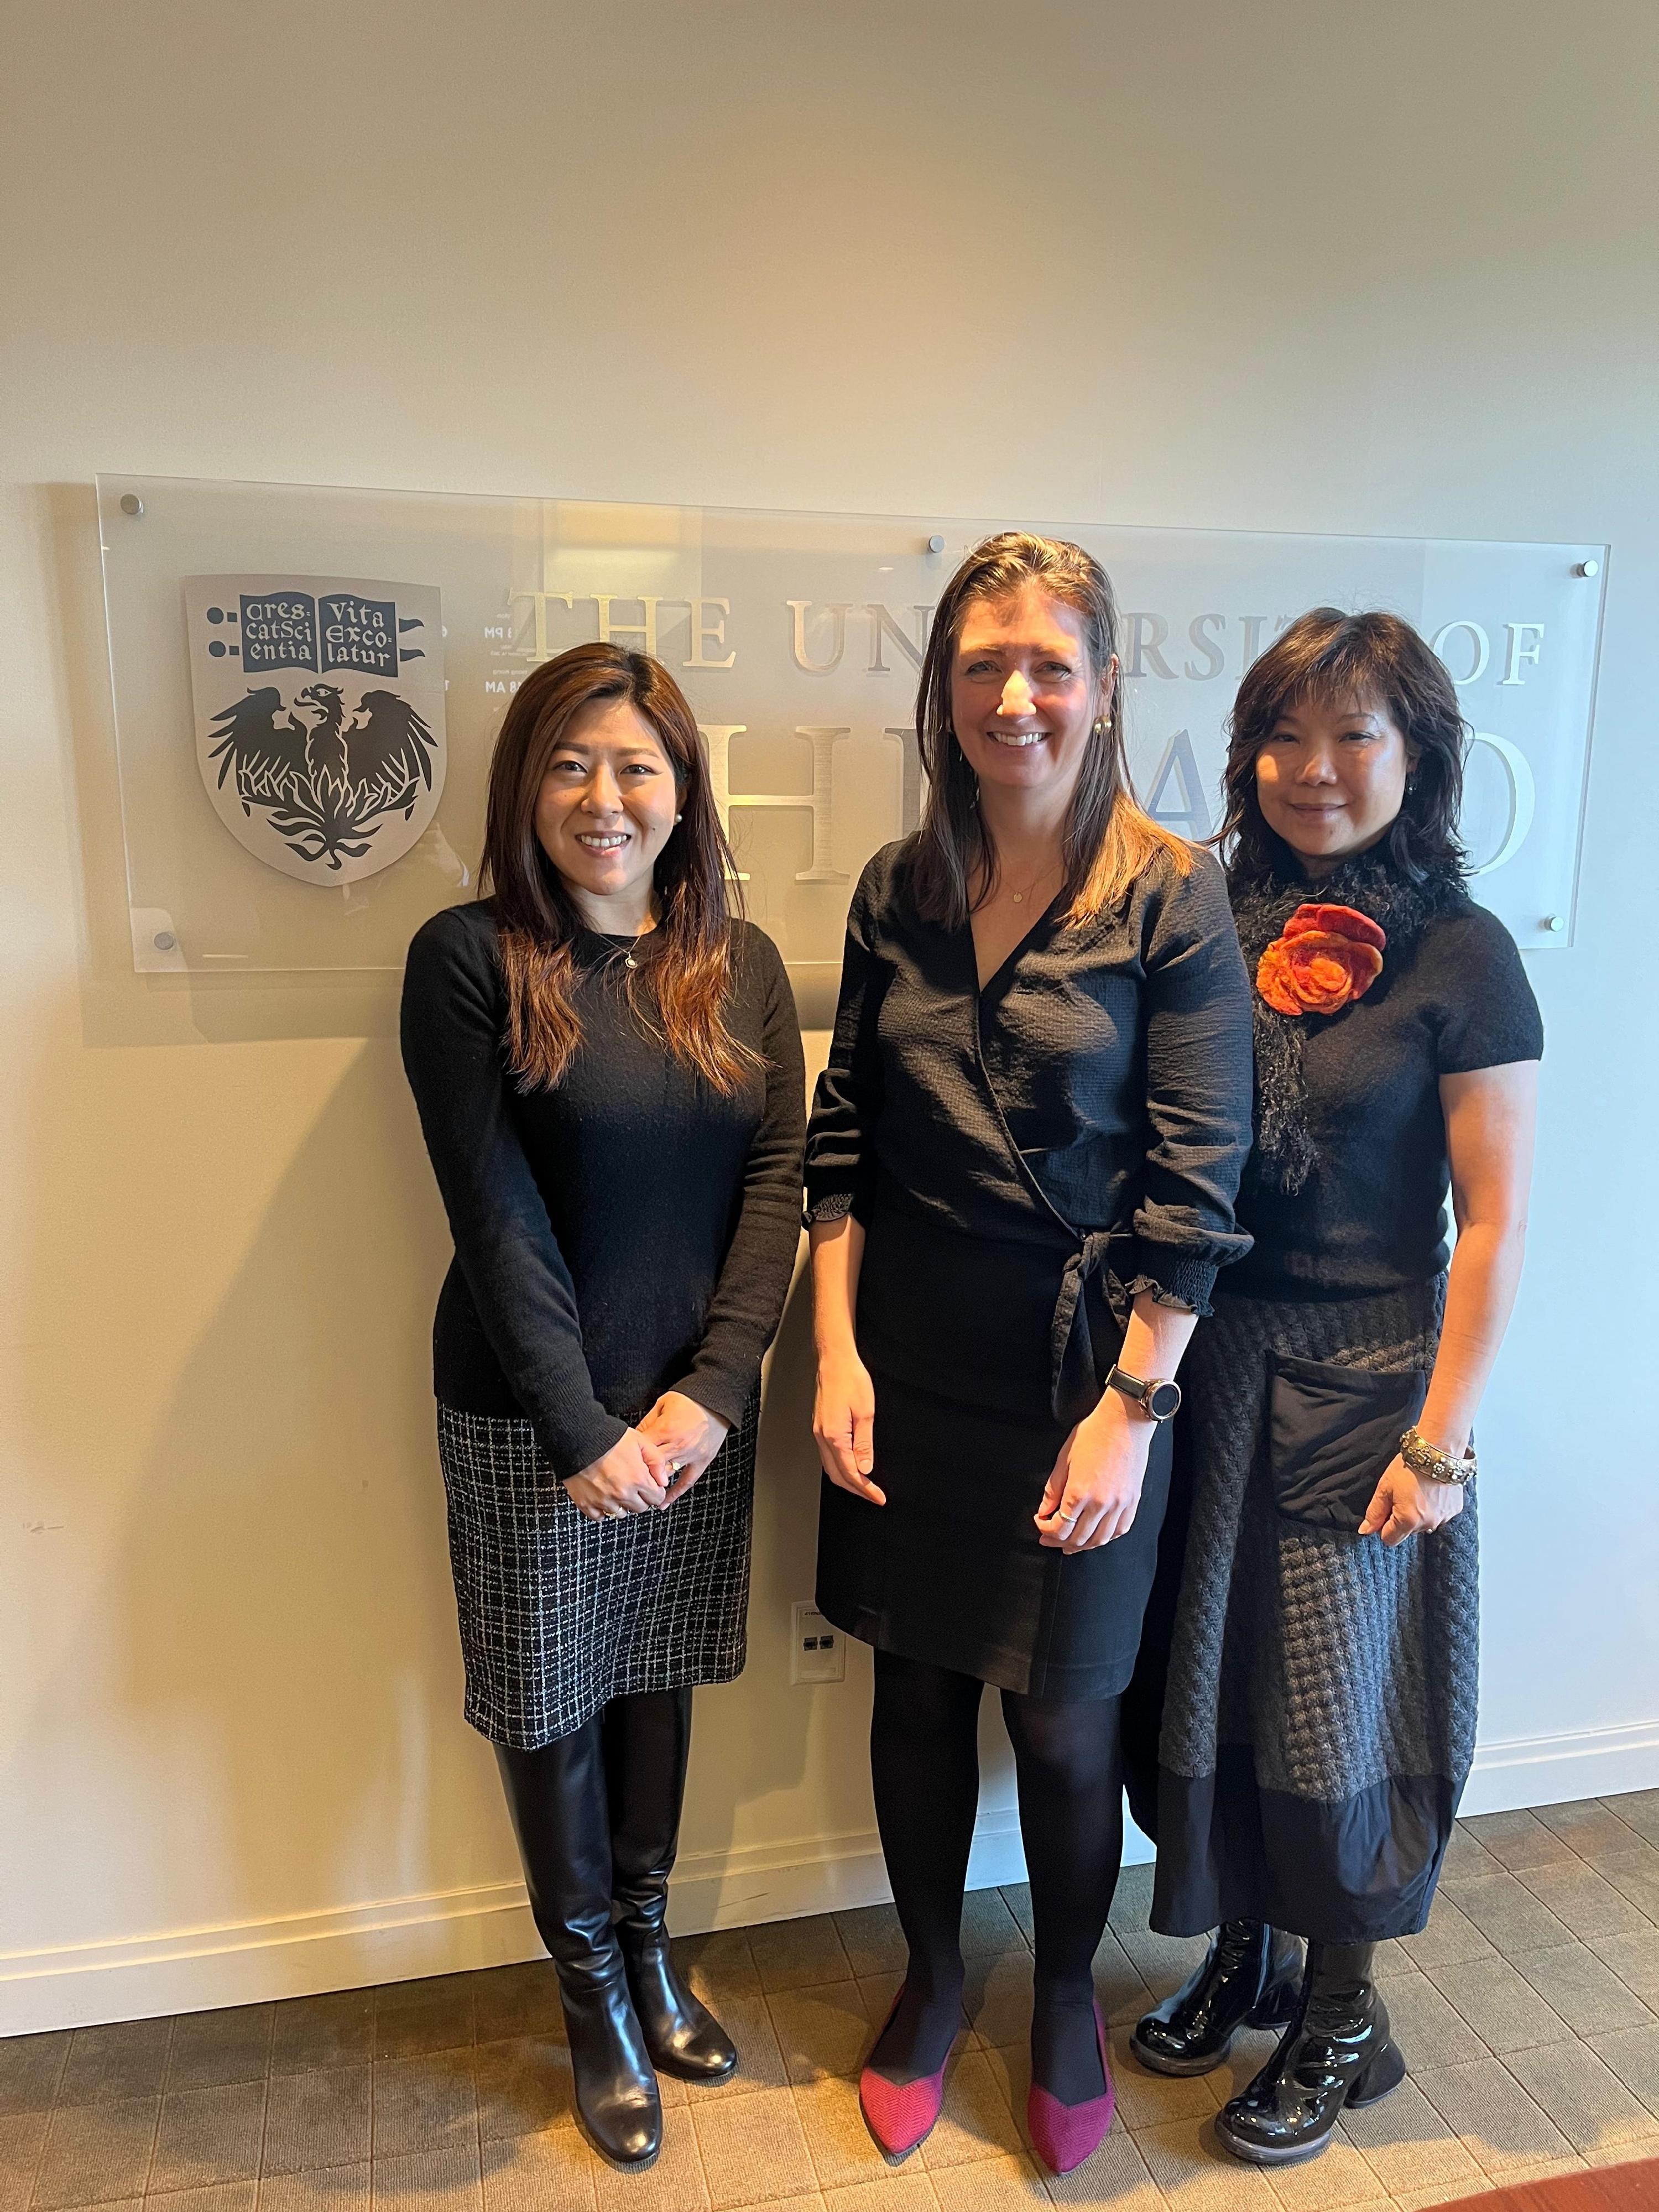 The Director of the Hong Kong Economic and Trade Office, New York, Ms Maisie Ho, celebrated the festive season with the business and trade sectors in Chicago, Illinois from  December 13 to15 (Chicago time), where she connected with local government, arts and education interlocutors to discuss matters of mutual interests during her three-day stay. Photo shows (from left) Ms Ho with the Associate Vice President of Global Initiatives and Strategy at the University of Chicago, Ms Katie Hrinyak and the Associate Director of Global Initiatives and Strategy at the University of Chicago, Ms Janice Ng on December 14. 